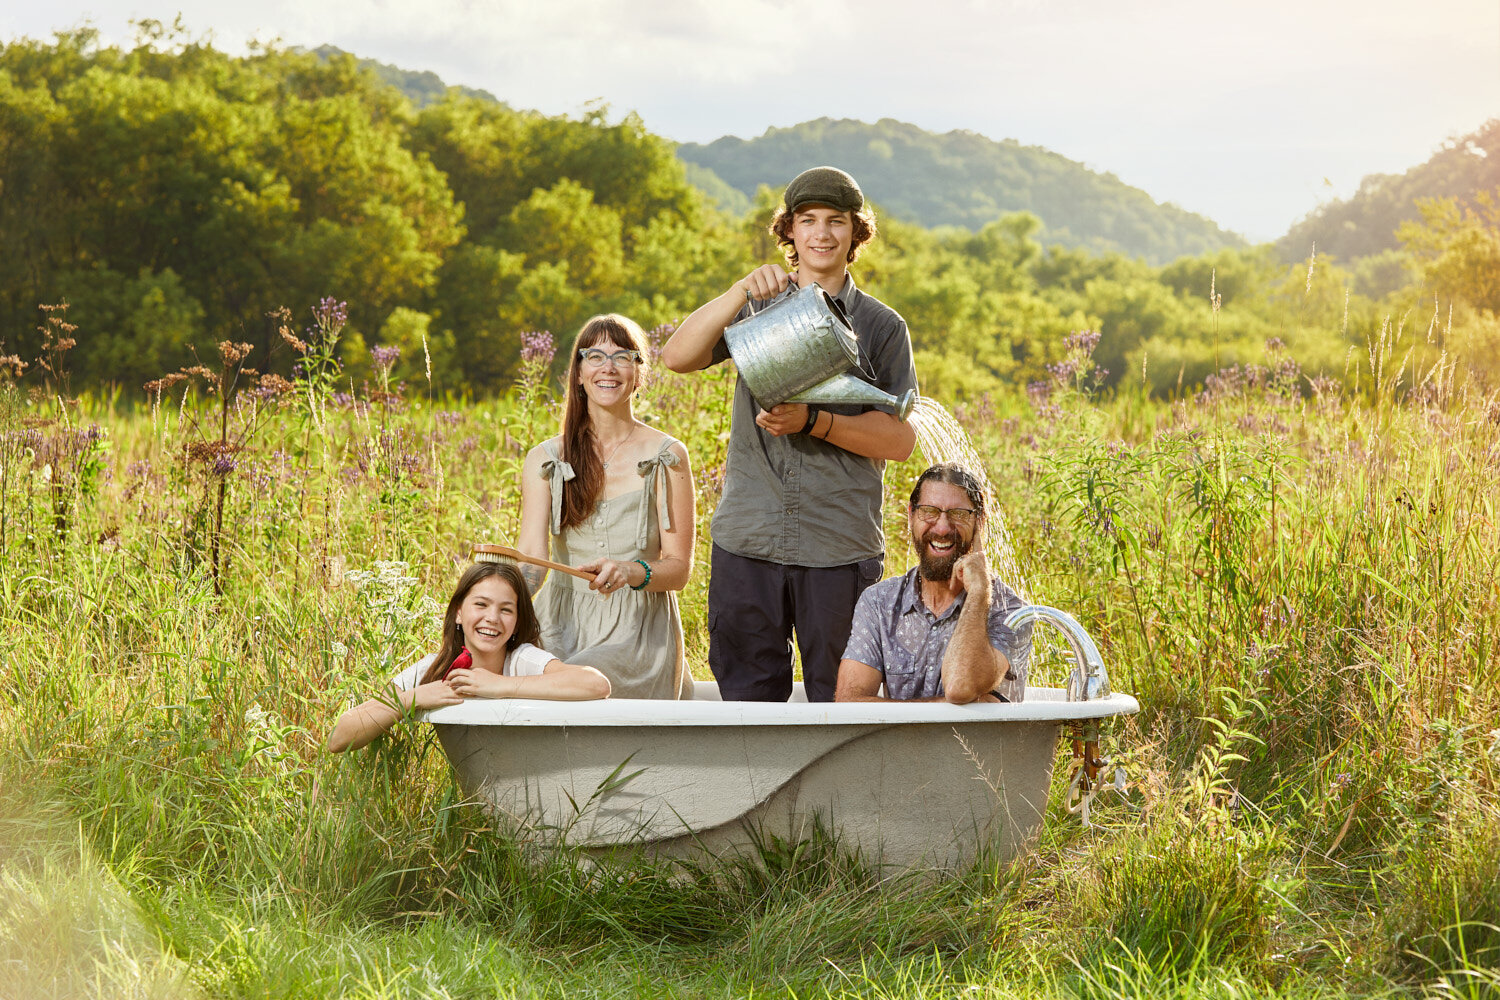 creative commercial portrait: LuSa Organics family in a bathtub in a field with rolling hills of Wisconsin's Driftless Region.